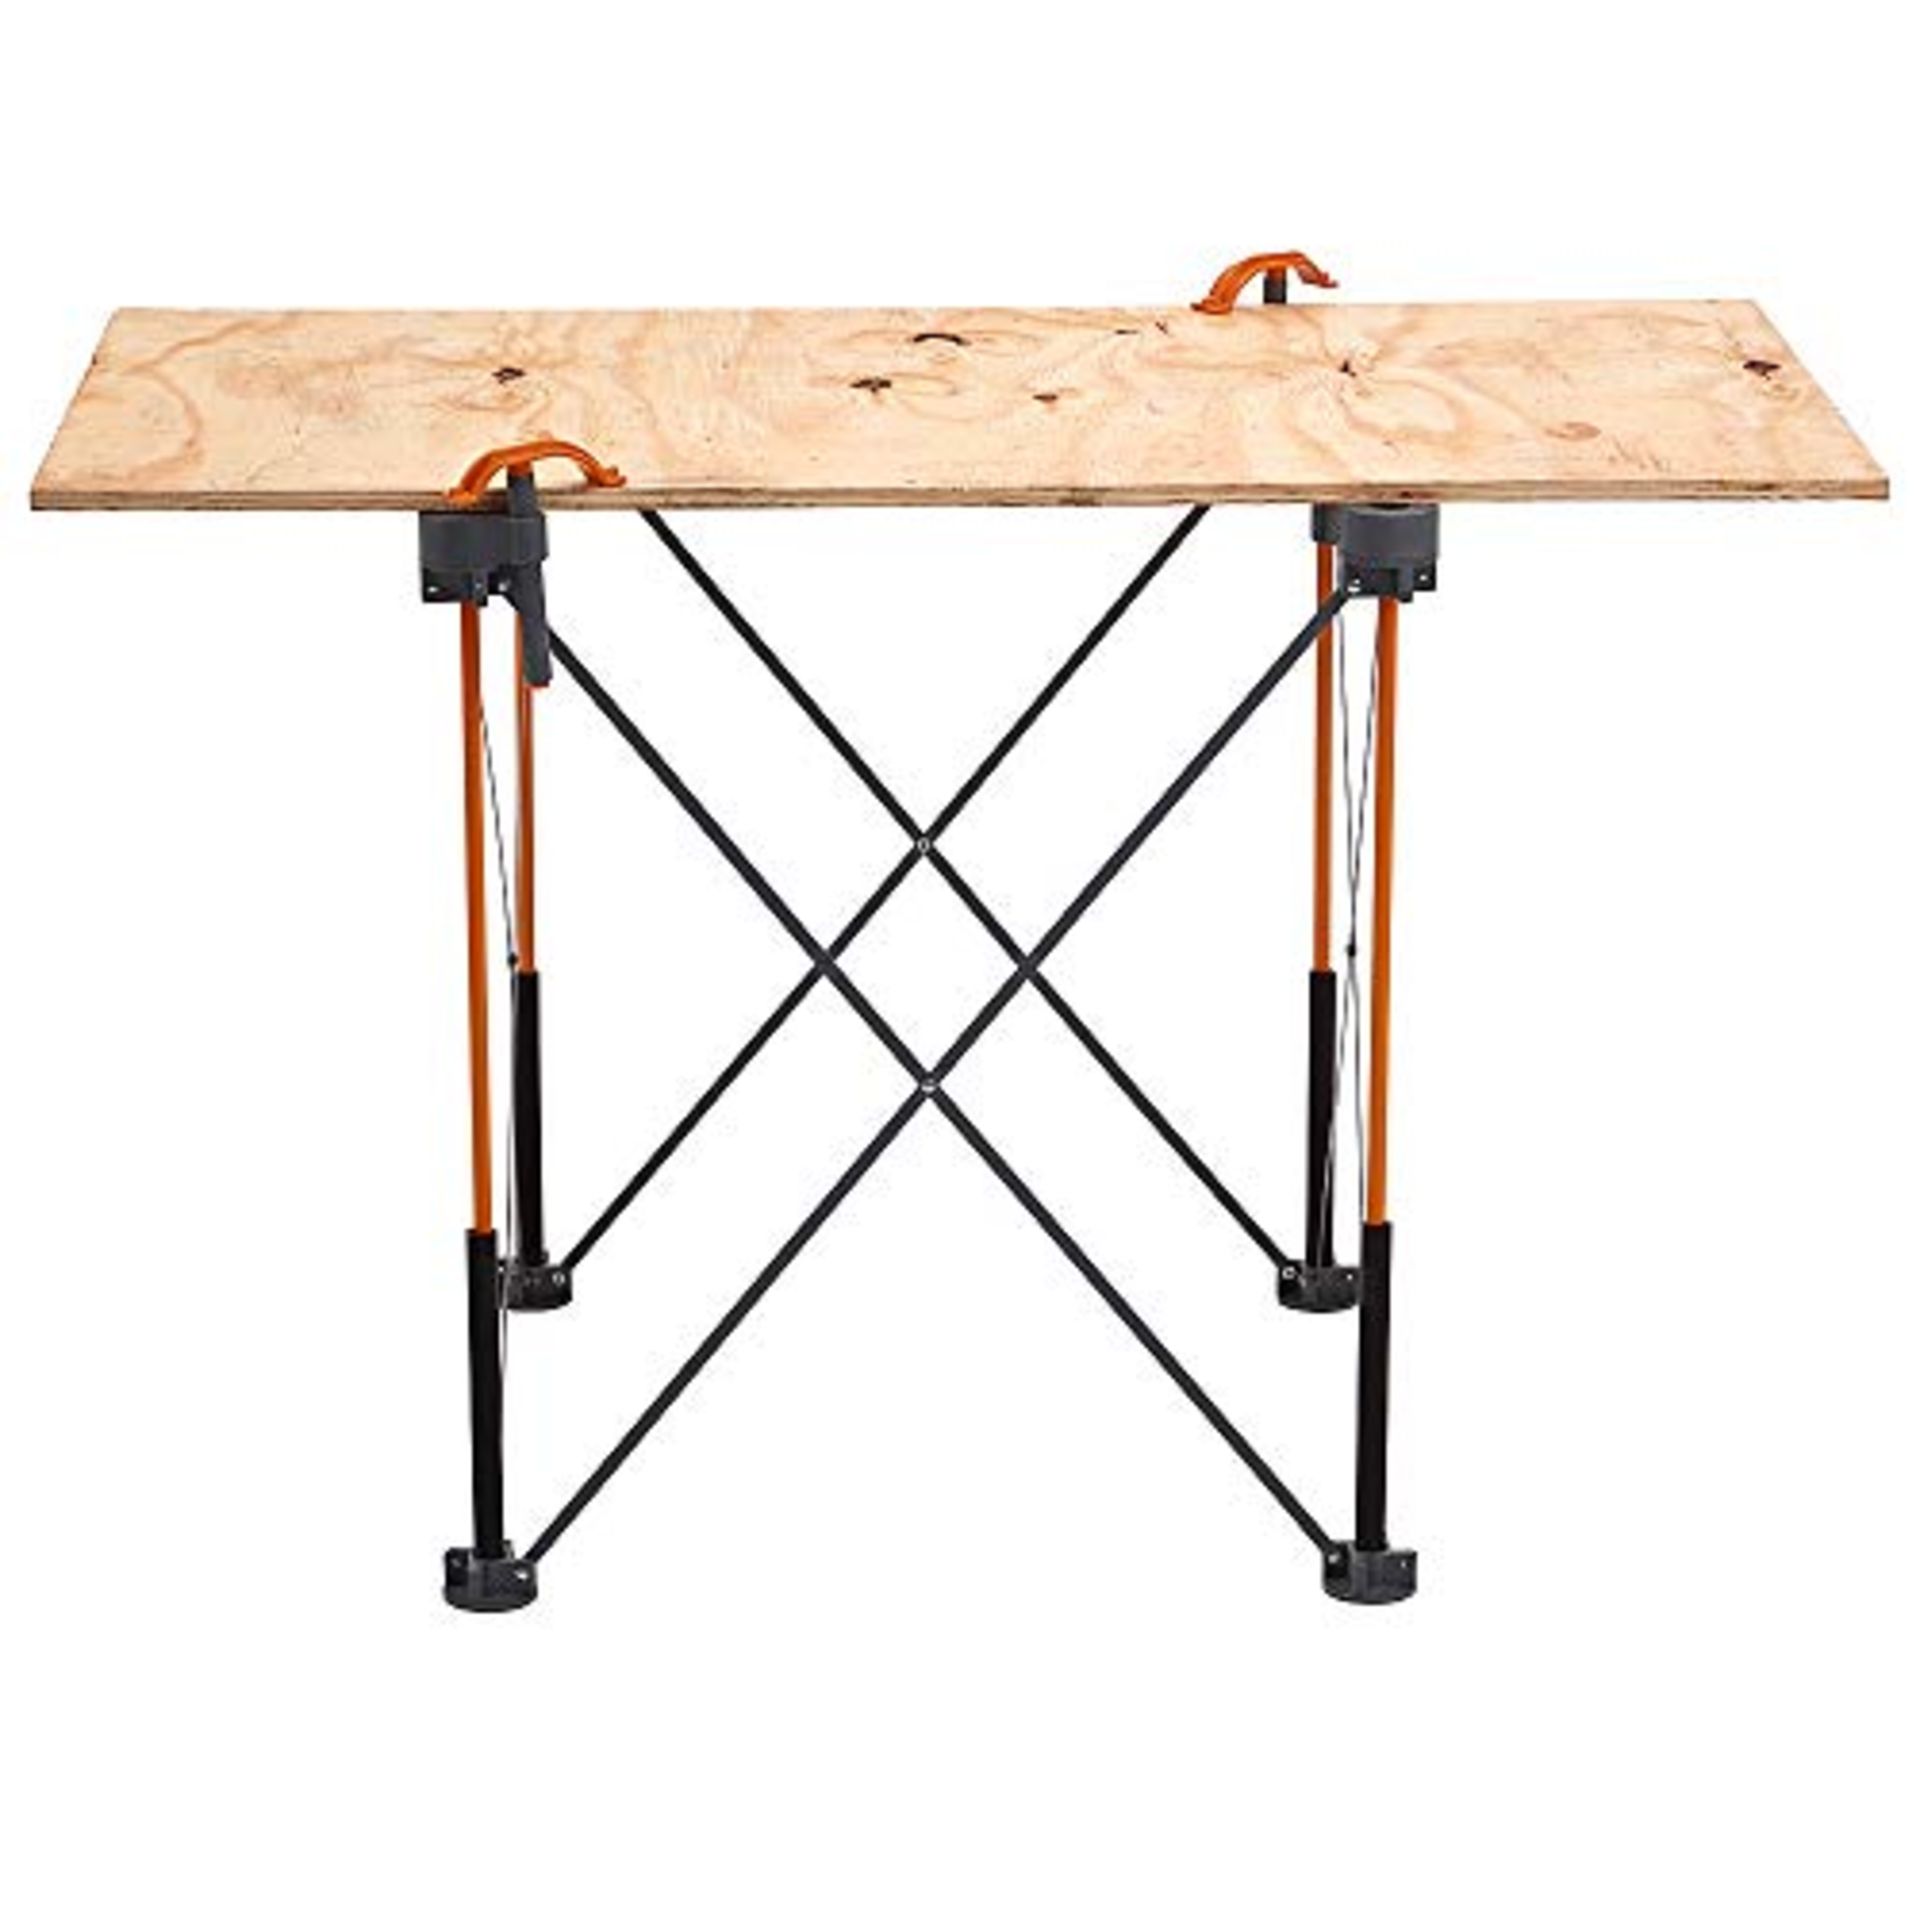 1 x Bora Centipede 2' x 2' Work Support Sawhorse, 4 x-Cups, 2 Quick Clamps, C/S Bag, CK4S | EAN: 087 - Image 4 of 8